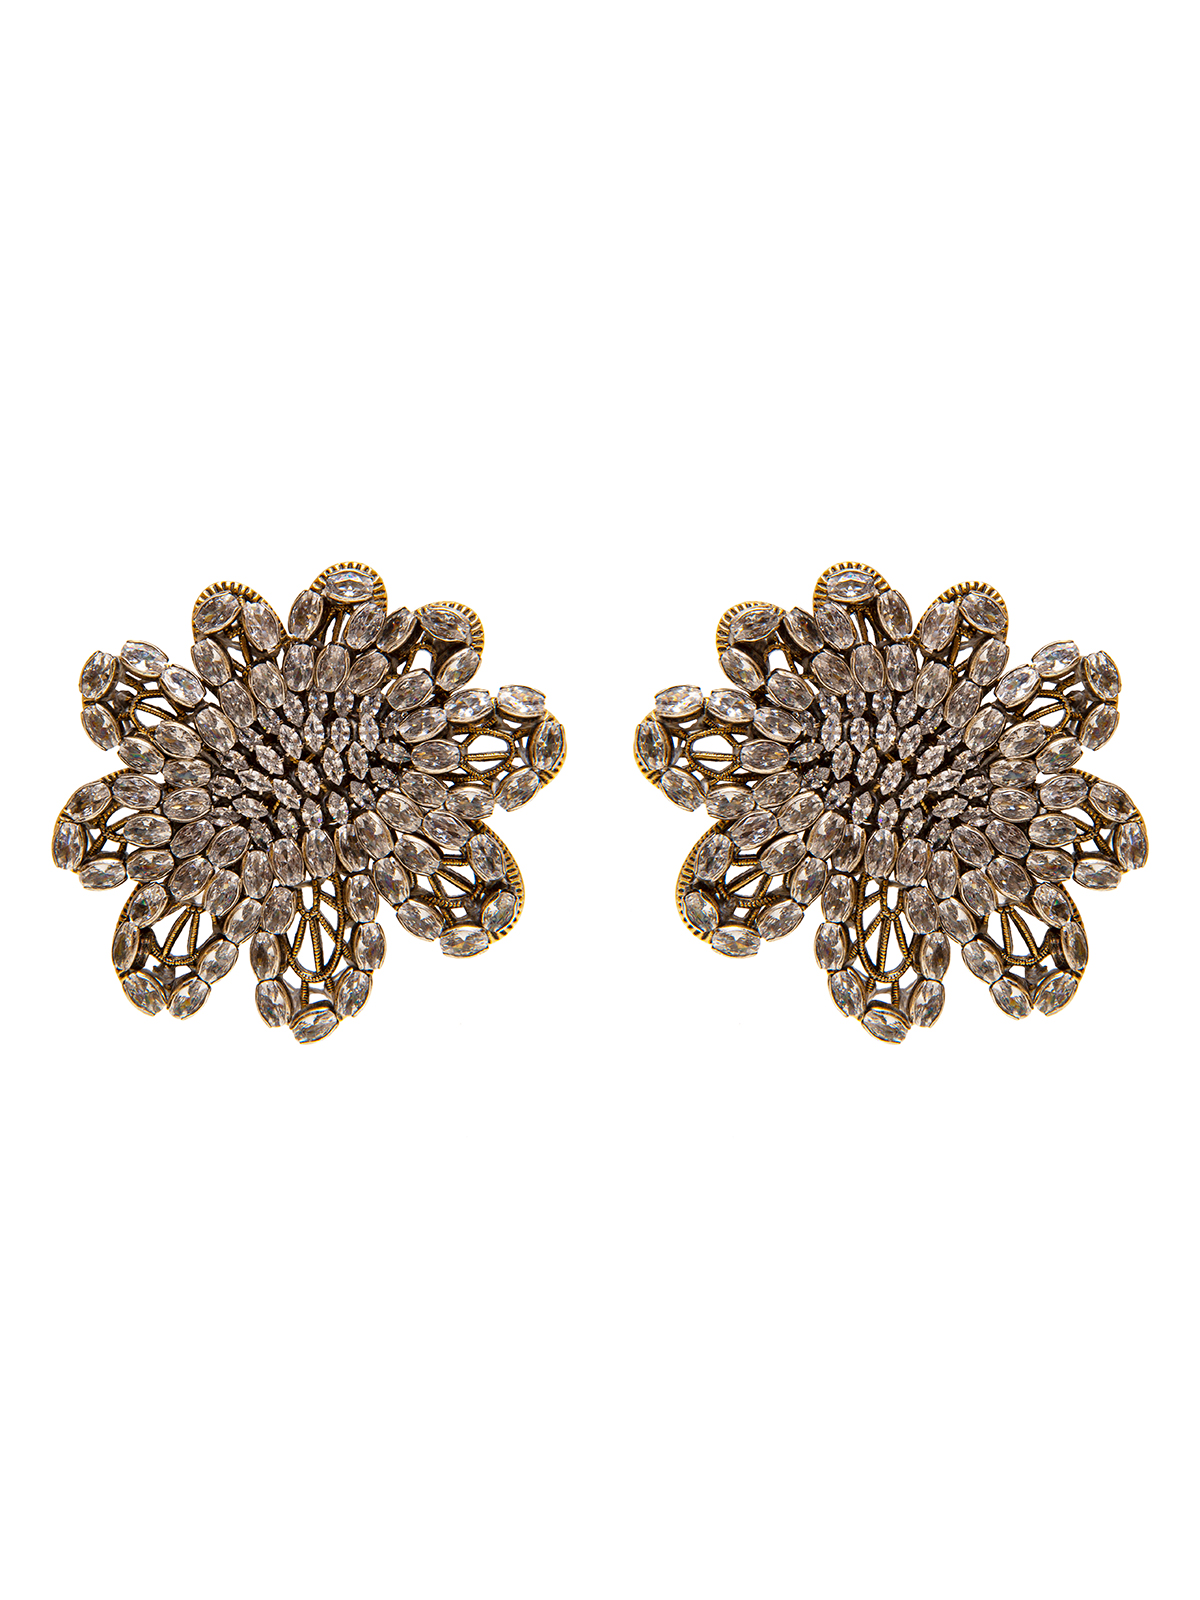 Flower earrings with crystal embroidery